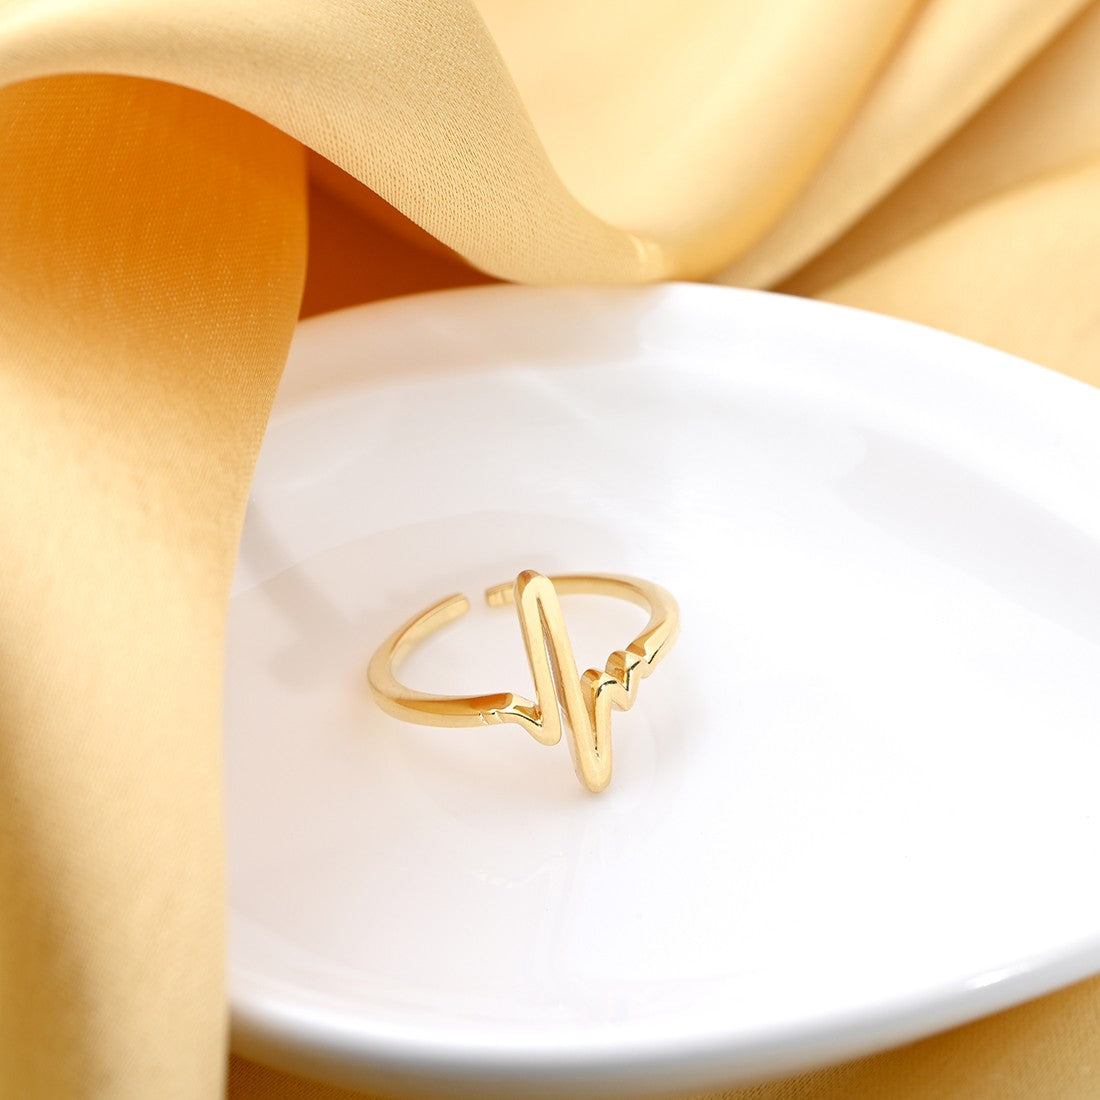 Heartbeat of Love Gold Plated 925 Sterling Silver Ring